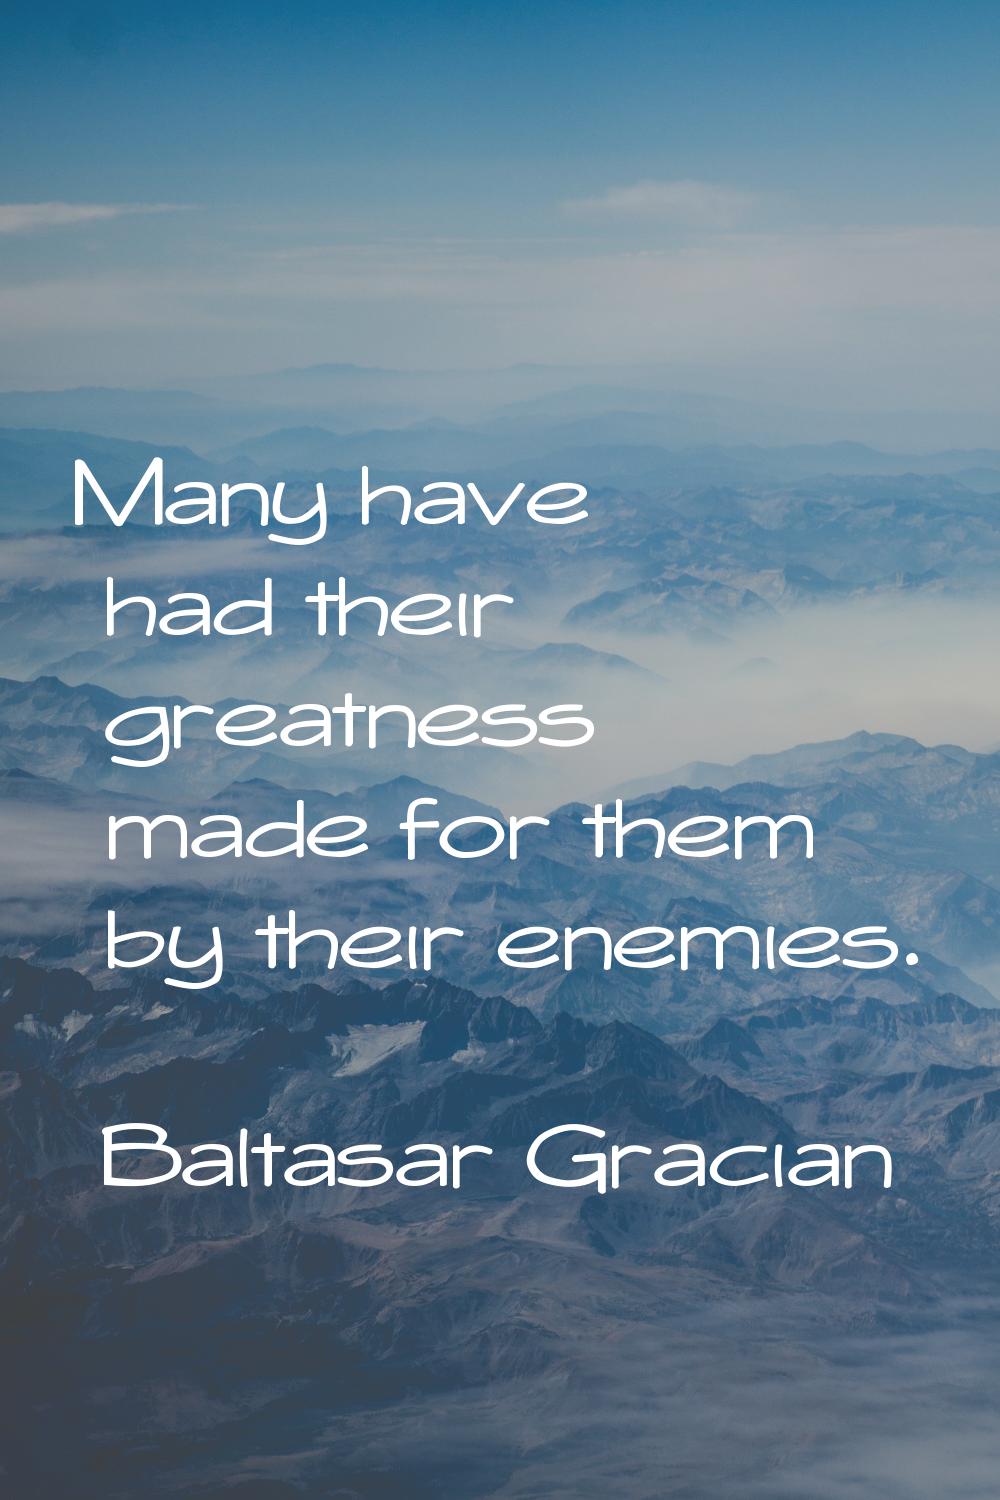 Many have had their greatness made for them by their enemies.